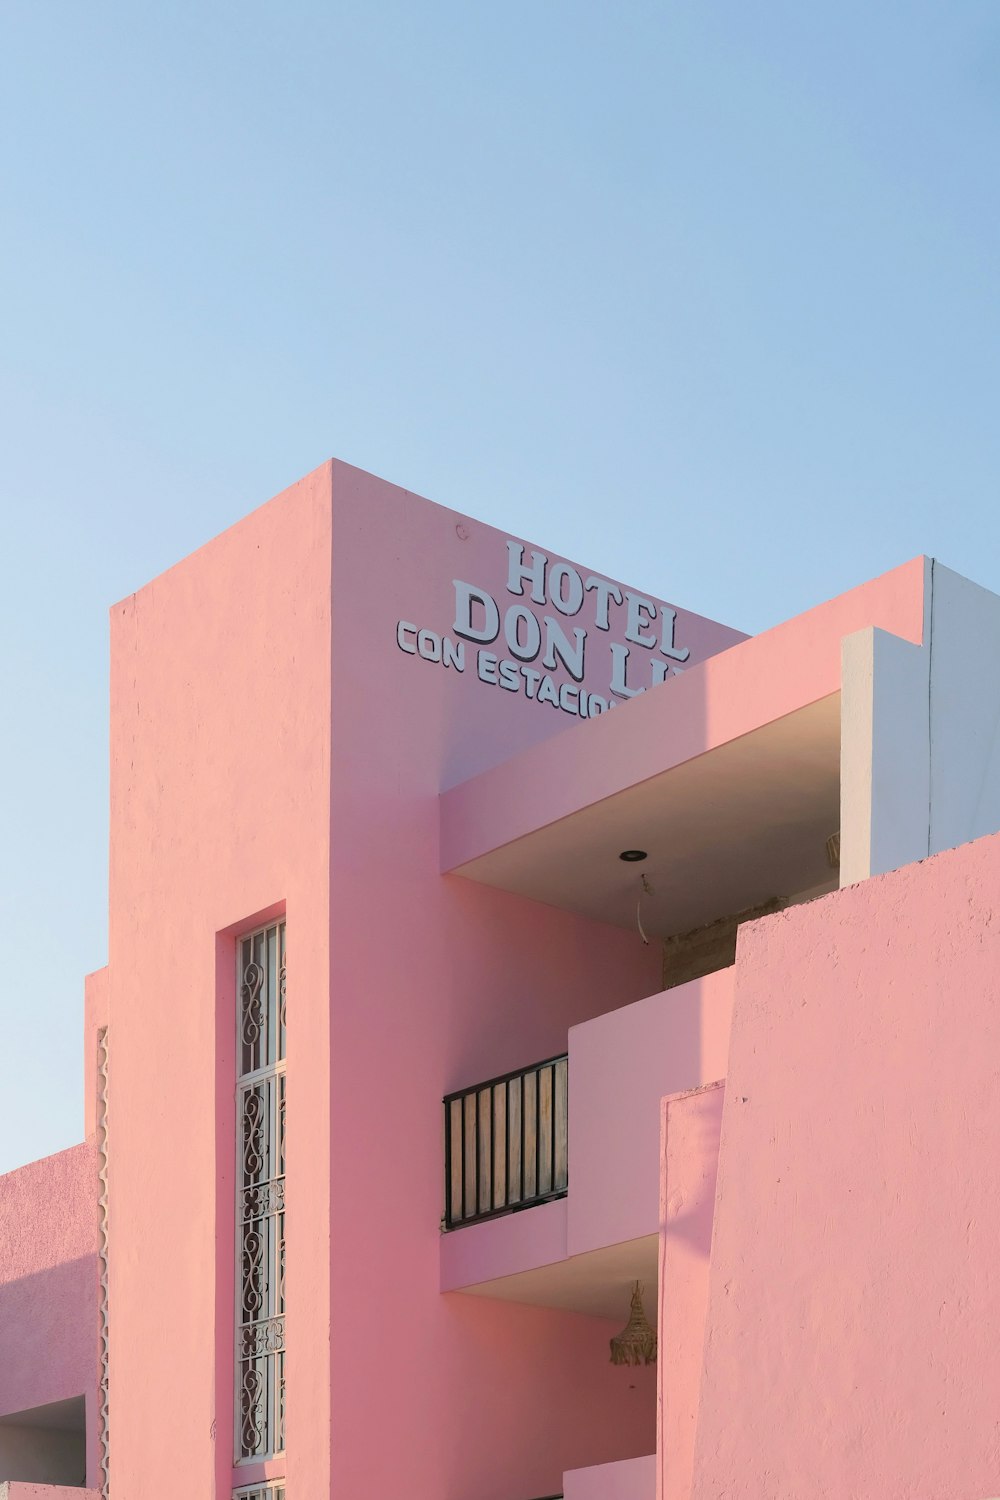 a pink building with a balcony and balconies